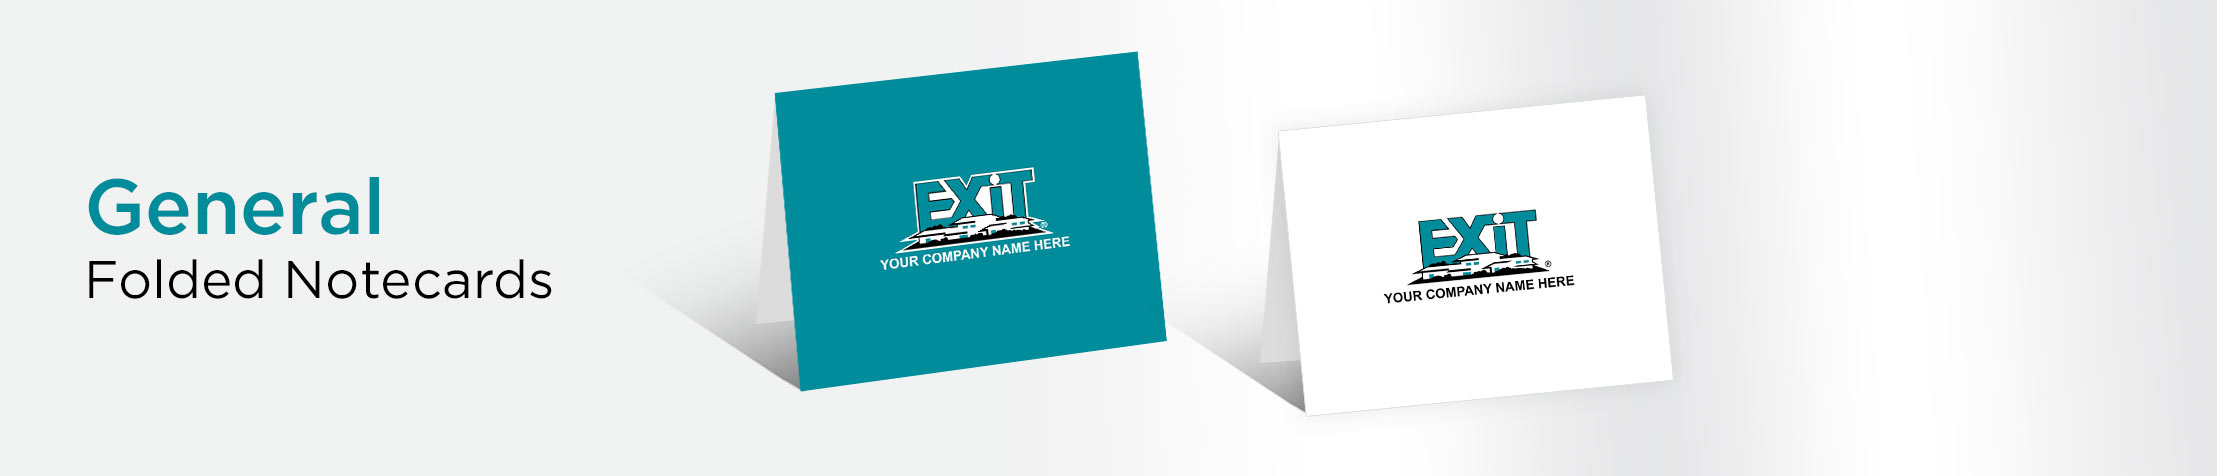 Exit Realty General Folded Note Cards - Exit Realty approved vendor note card stationery | BestPrintBuy.com